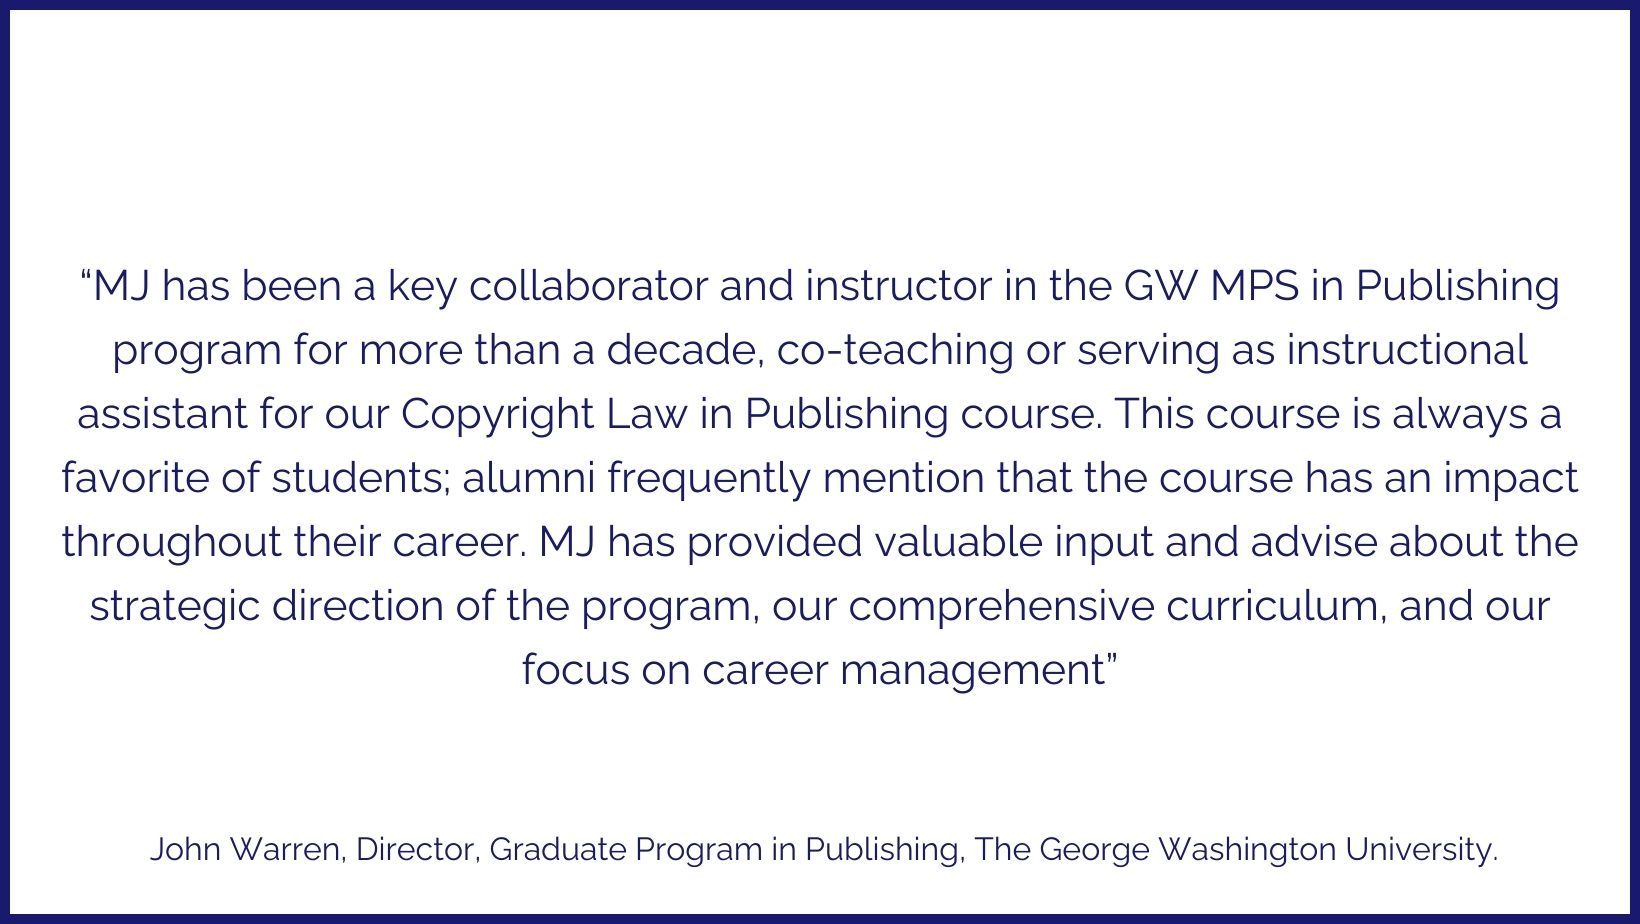 “MJ has been a key collaborator and instructor in the GW MPS in Publishing program for more than a decade, co-teaching or serving as instructional assistant for our Copyright Law in Publishing course. This course is always a favorite of students; alumni frequently mention that the course has an impact throughout their career. MJ has provided valuable input and advise about the strategic direction of the program, our comprehensive curriculum, and our focus on career management”